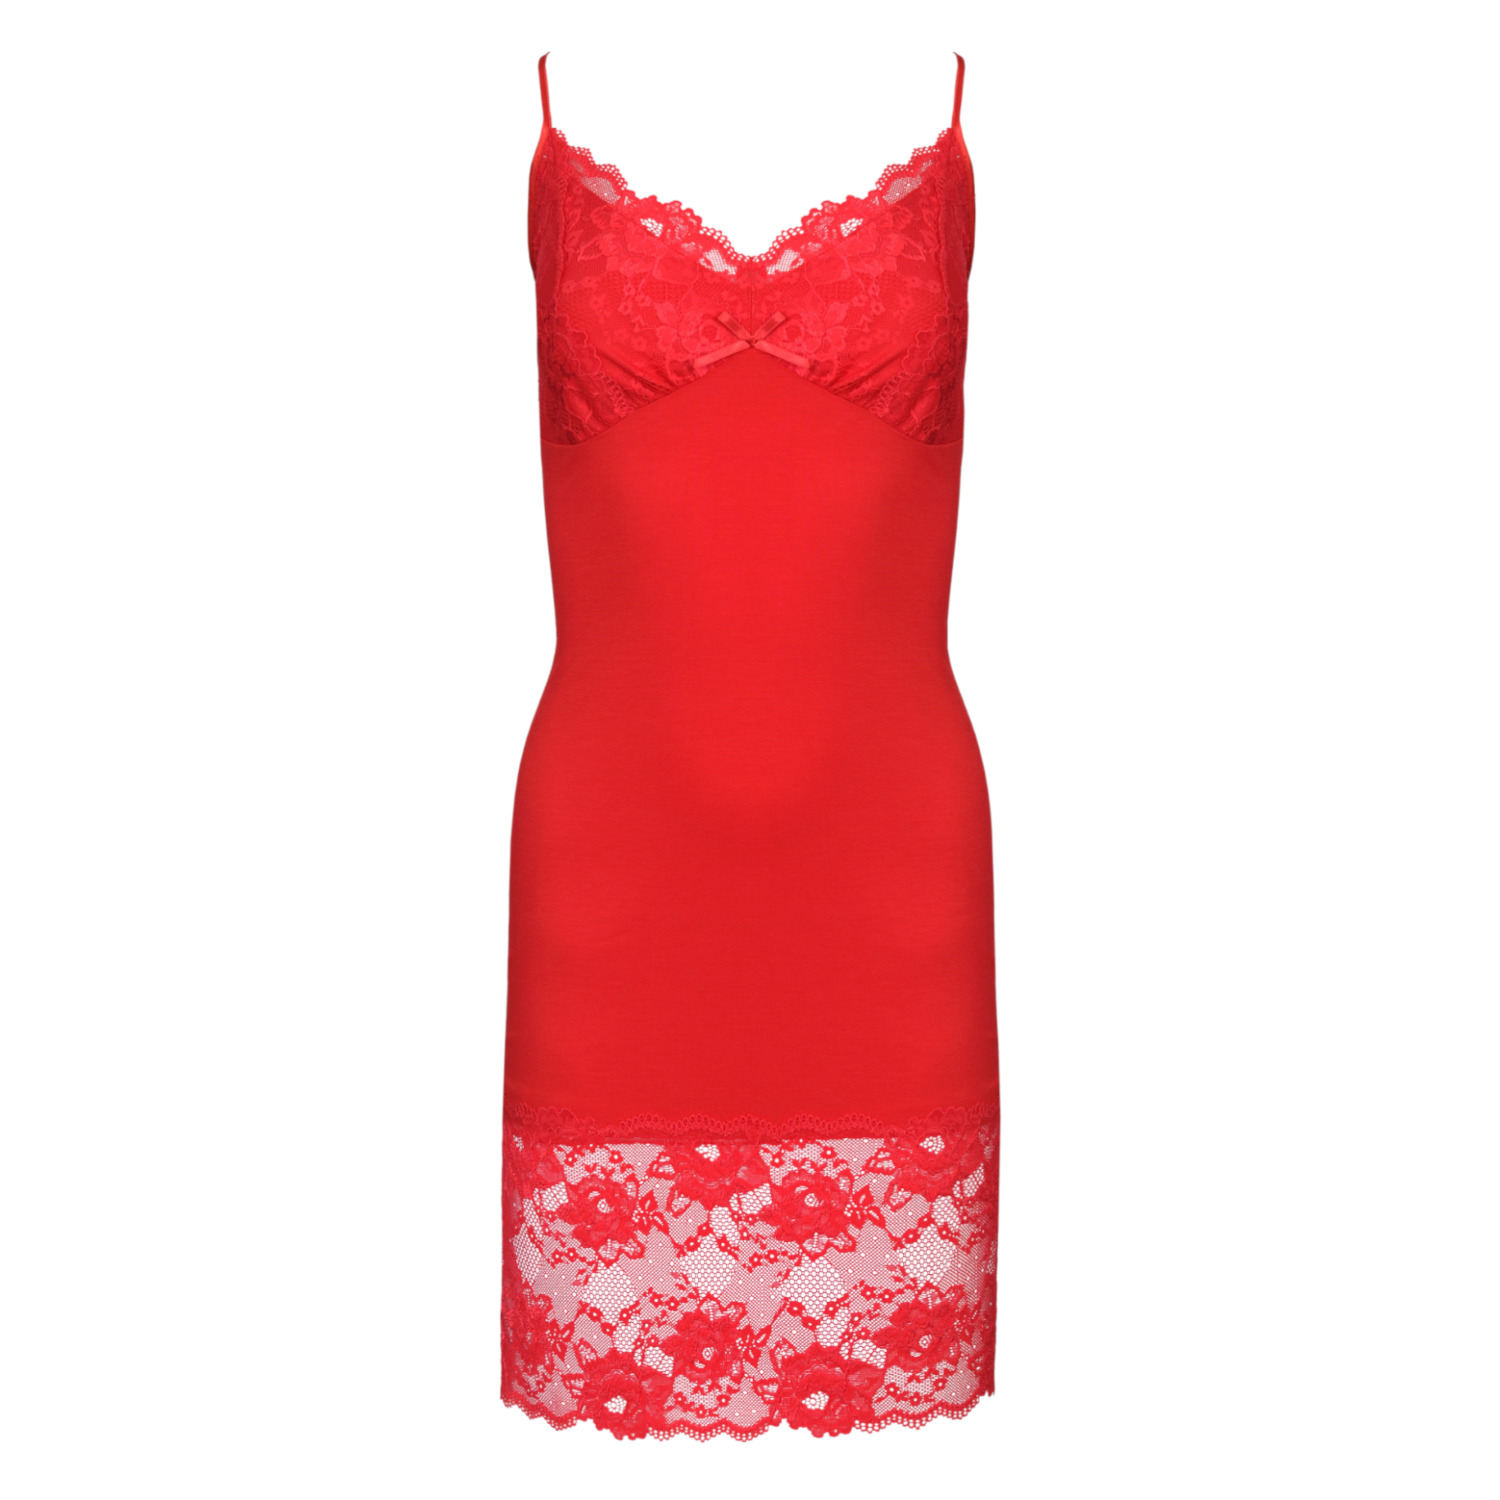 Women’s Classic Lace Chemise Nightdress - Red Small Oh!Zuza Night & Day